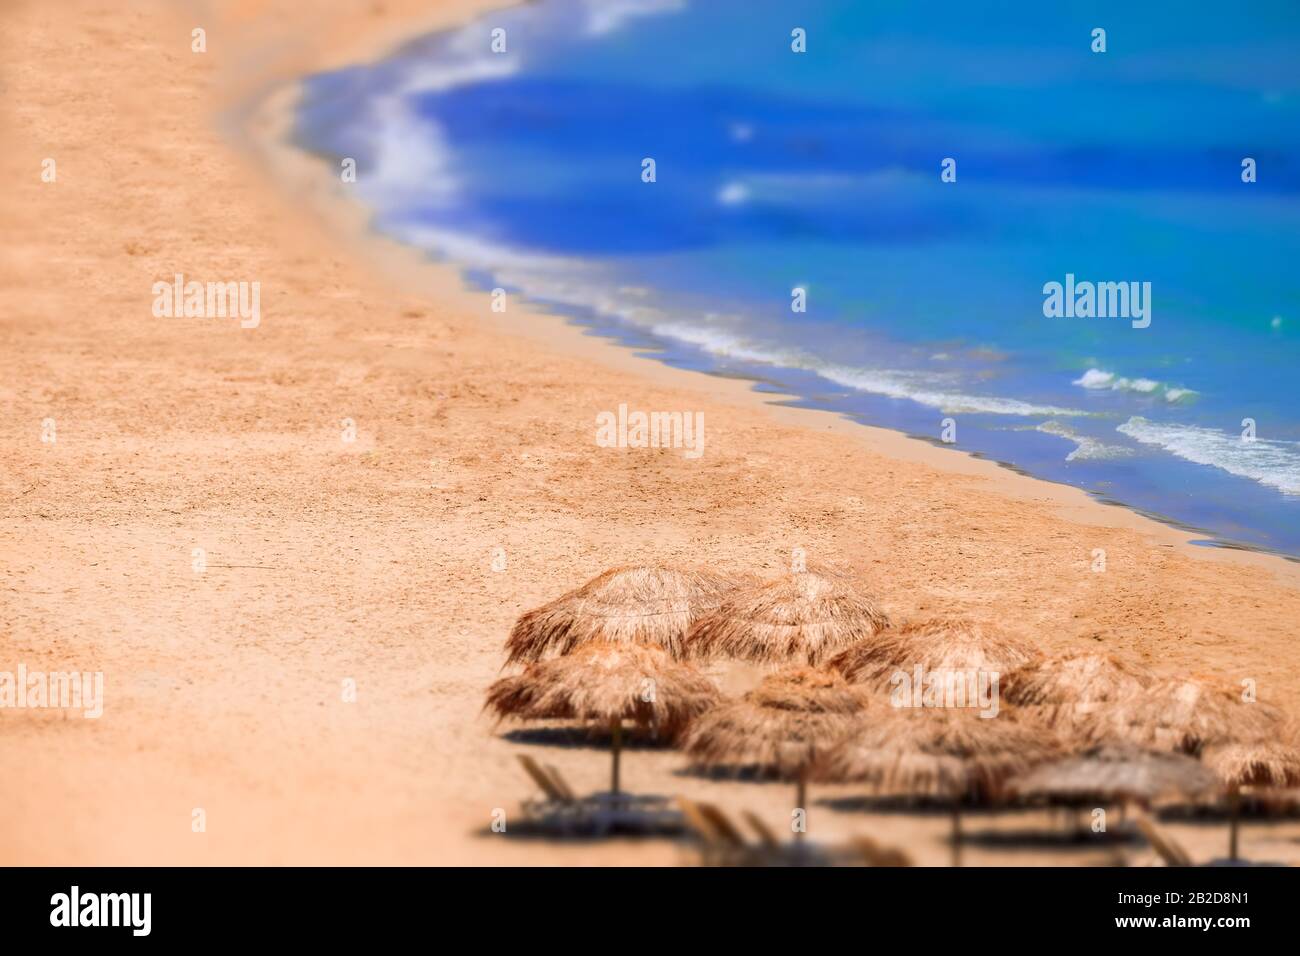 Tilt shift lens blur. Abstract view of amazing beach landscape with straw umbrella near azure sea. Mediterranean paradise in Greece. Travel background Stock Photo